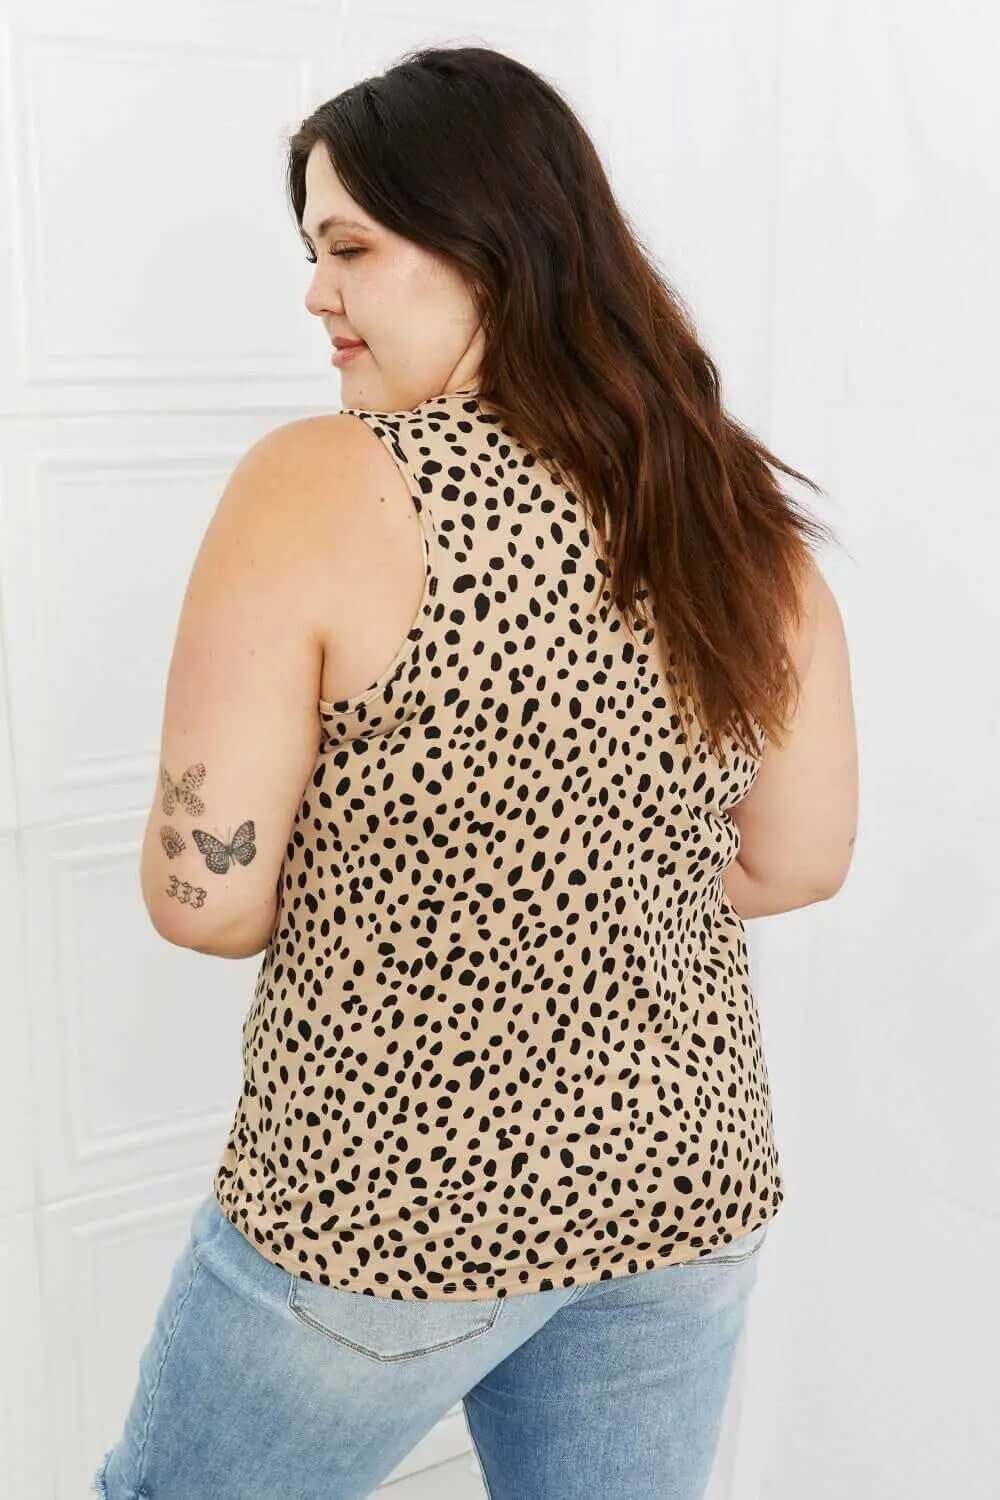 All About Me Full Size Sleeveless Top - Rocca & Co